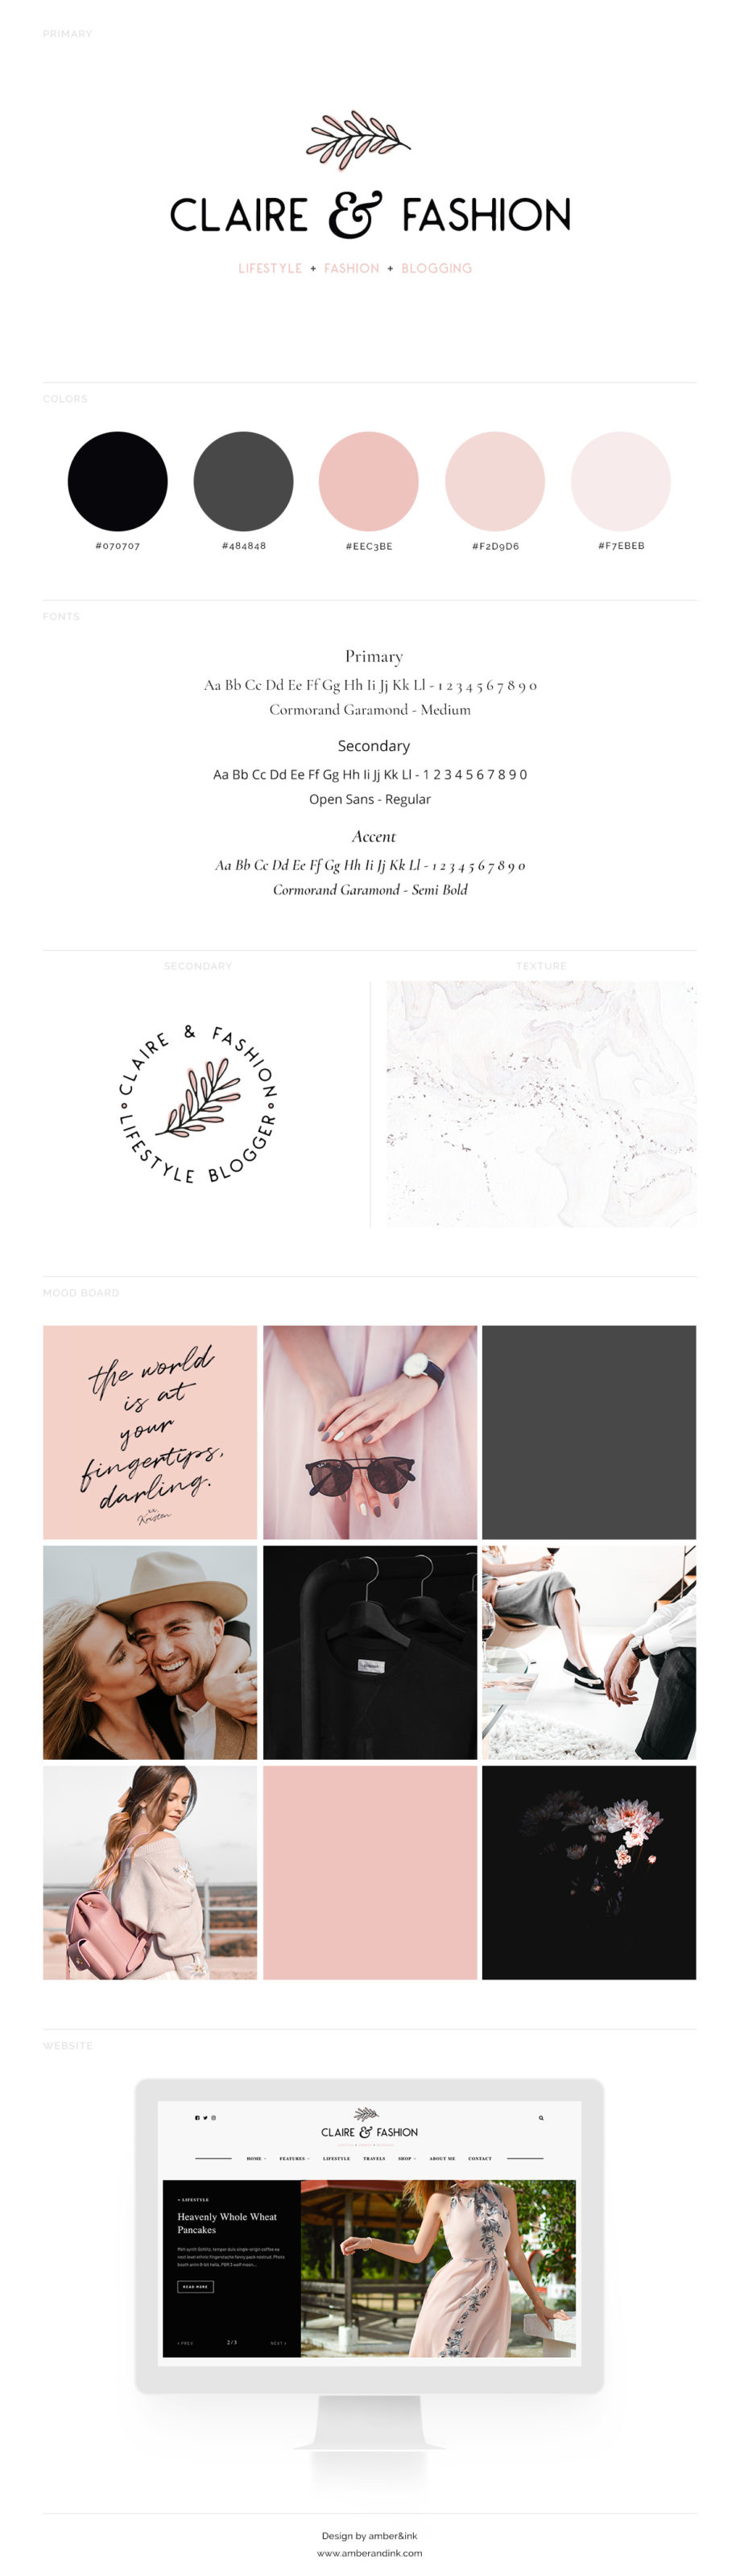 Chick, feminine branding board example. Includes pink and gray colors, website, color palette, logo design, and moon board.